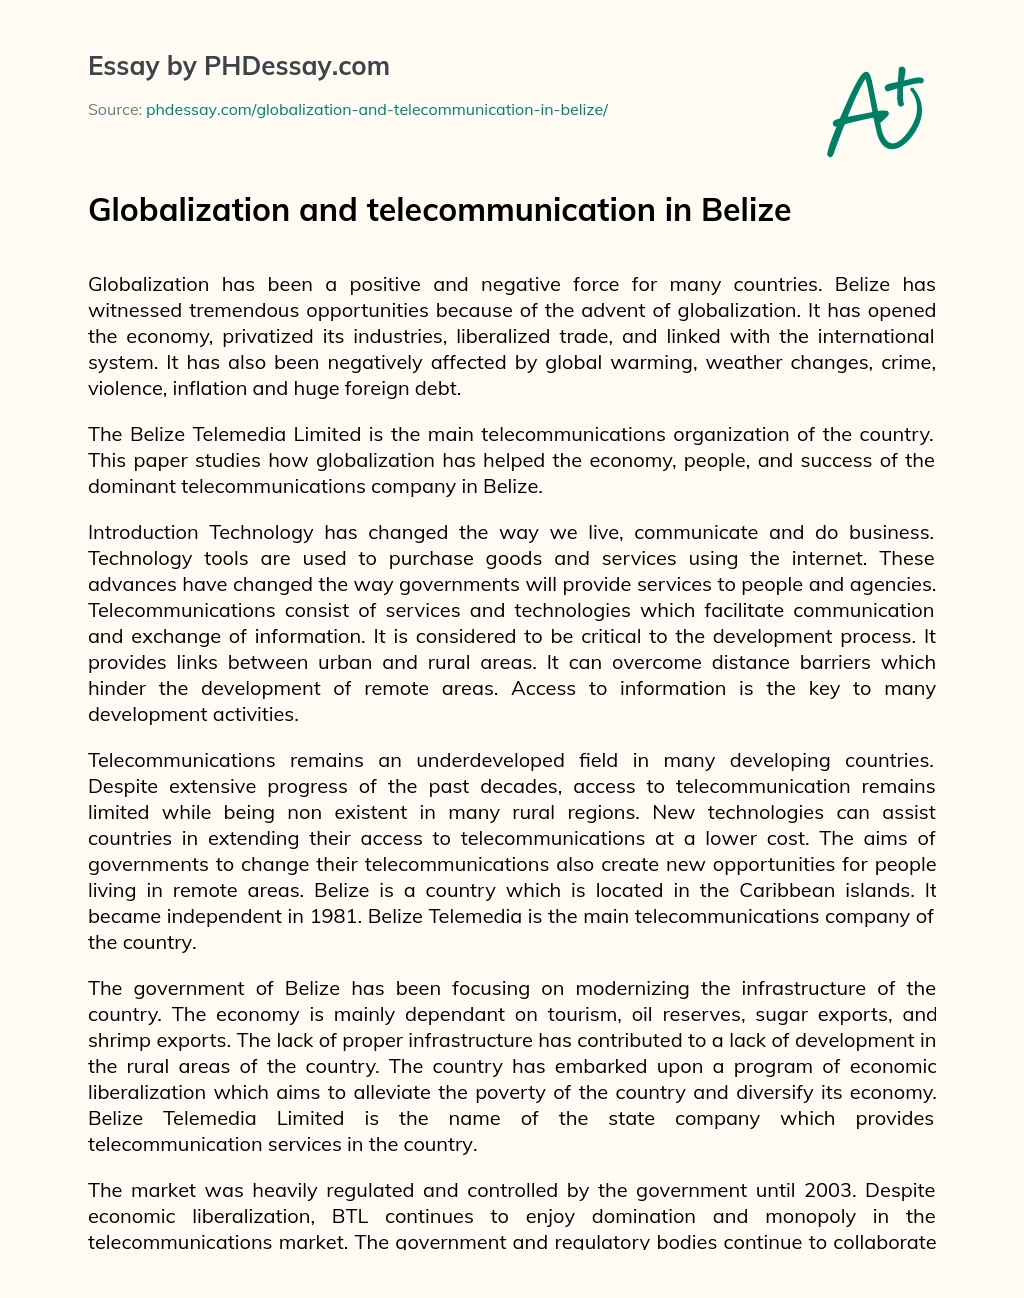 Globalization and telecommunication in Belize essay